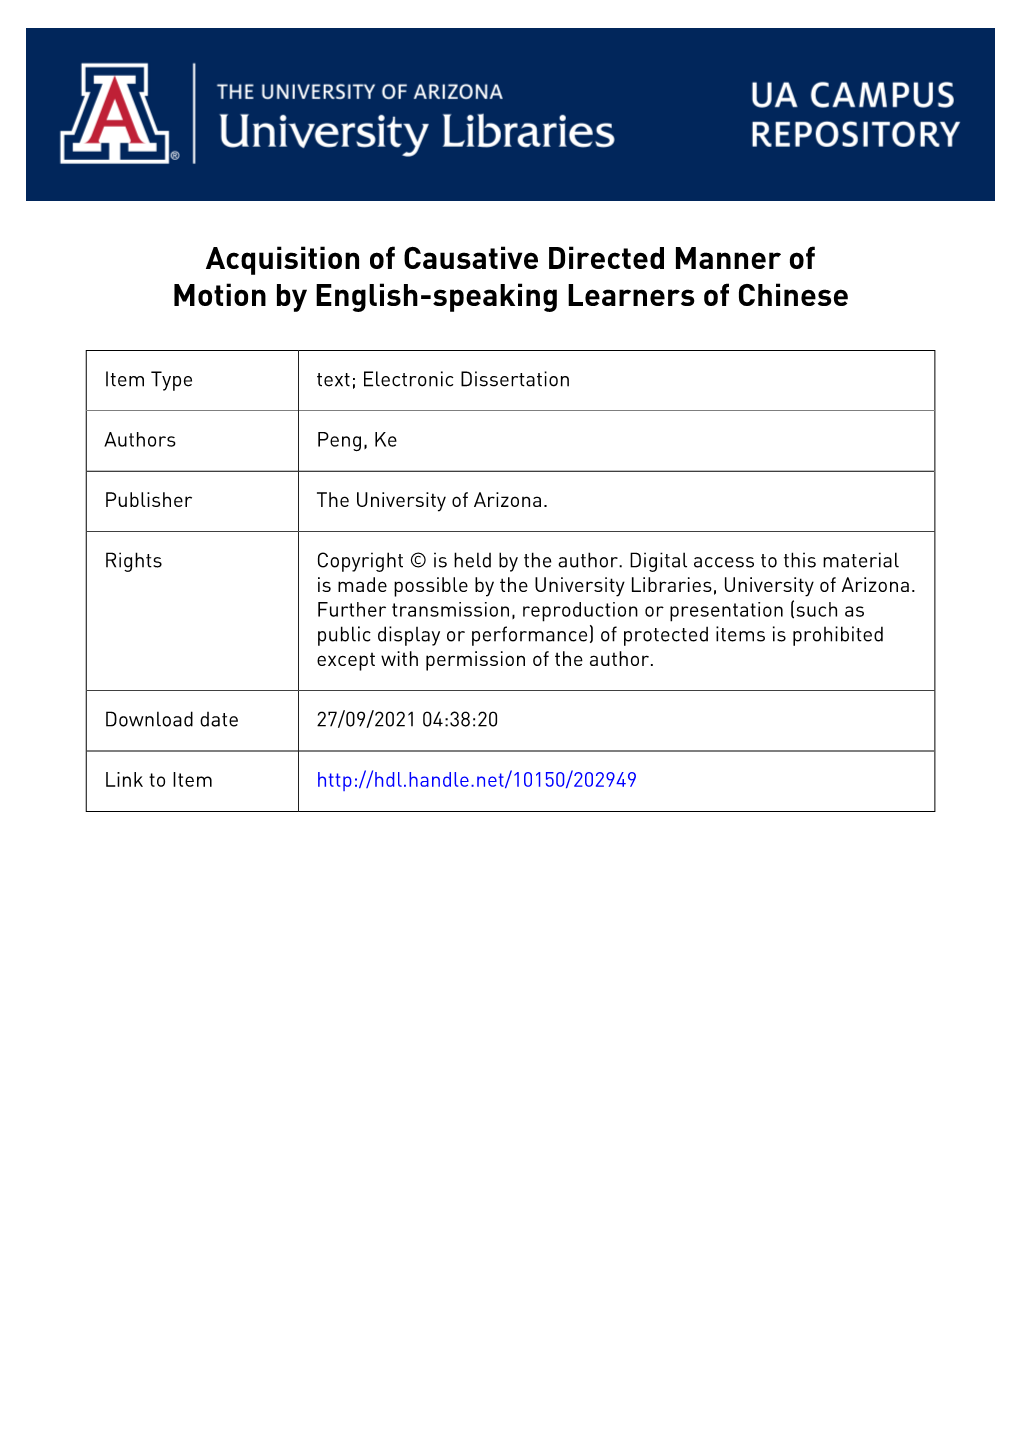 Acquisition of Causative Directed Manner of Motion by English-Speaking Learners of Chinese